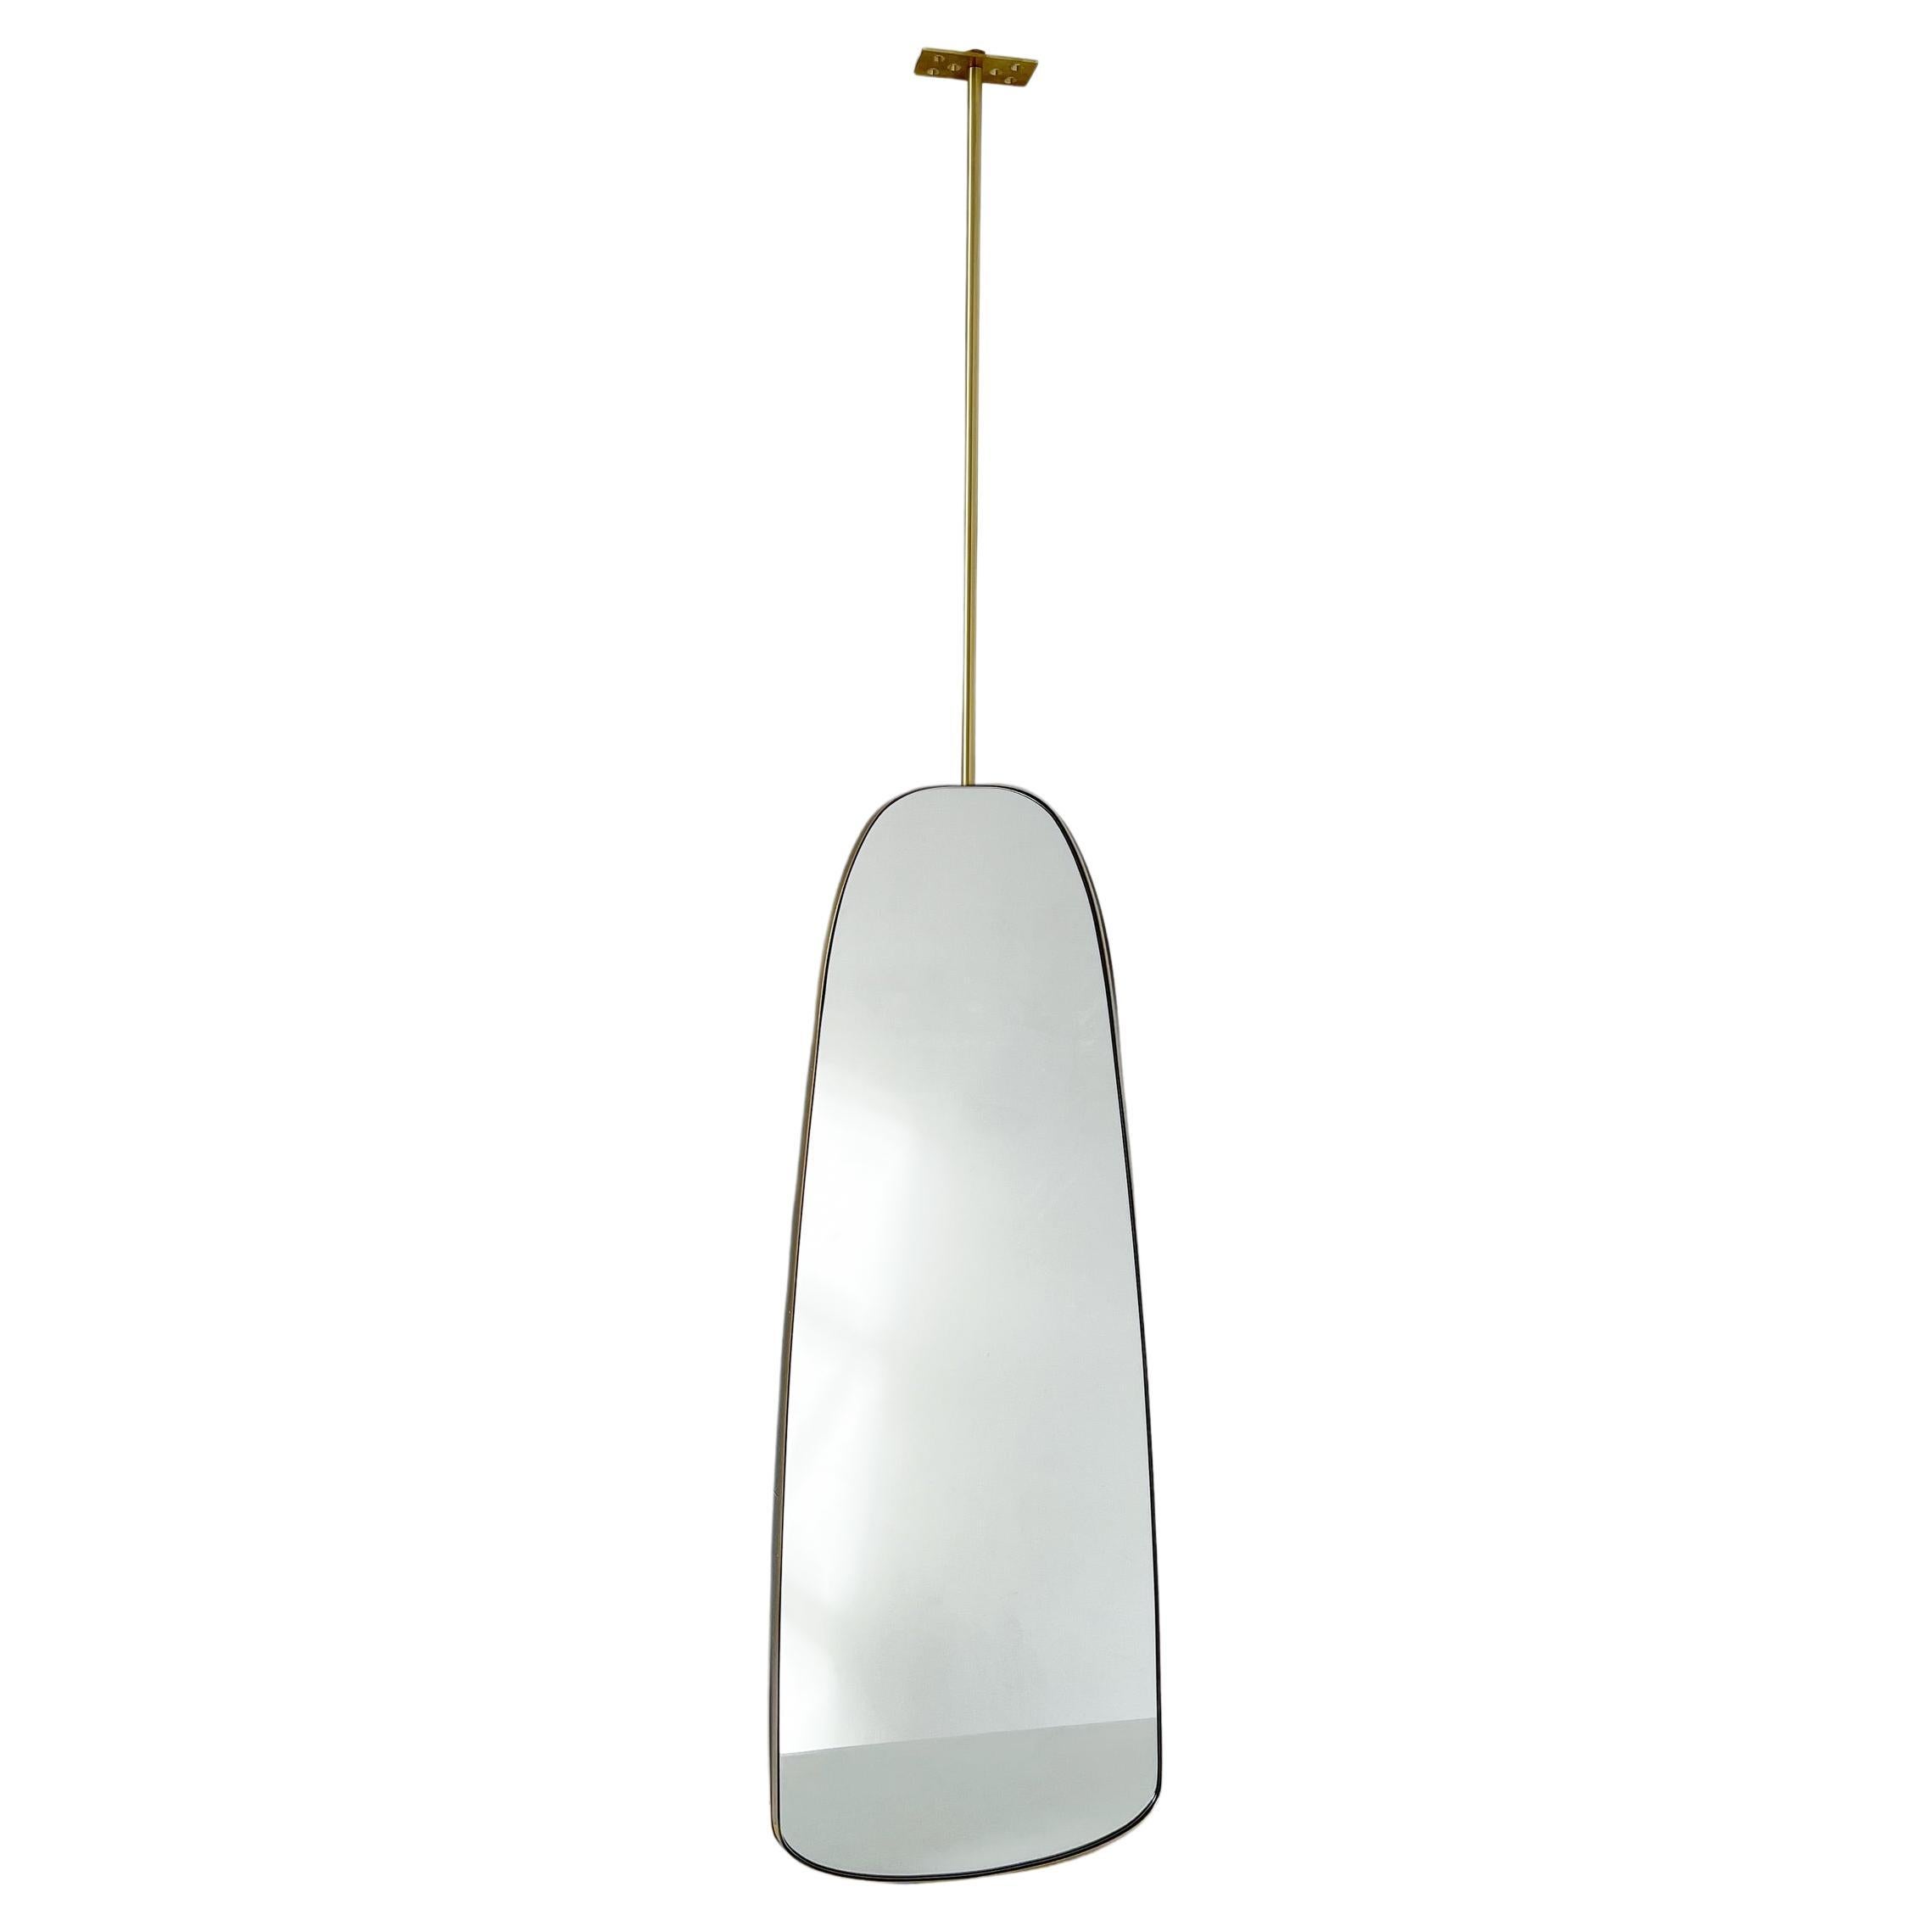 Ceiling Suspended Organic Shaped Mirror with an Elegant Brass Frame,Customisable